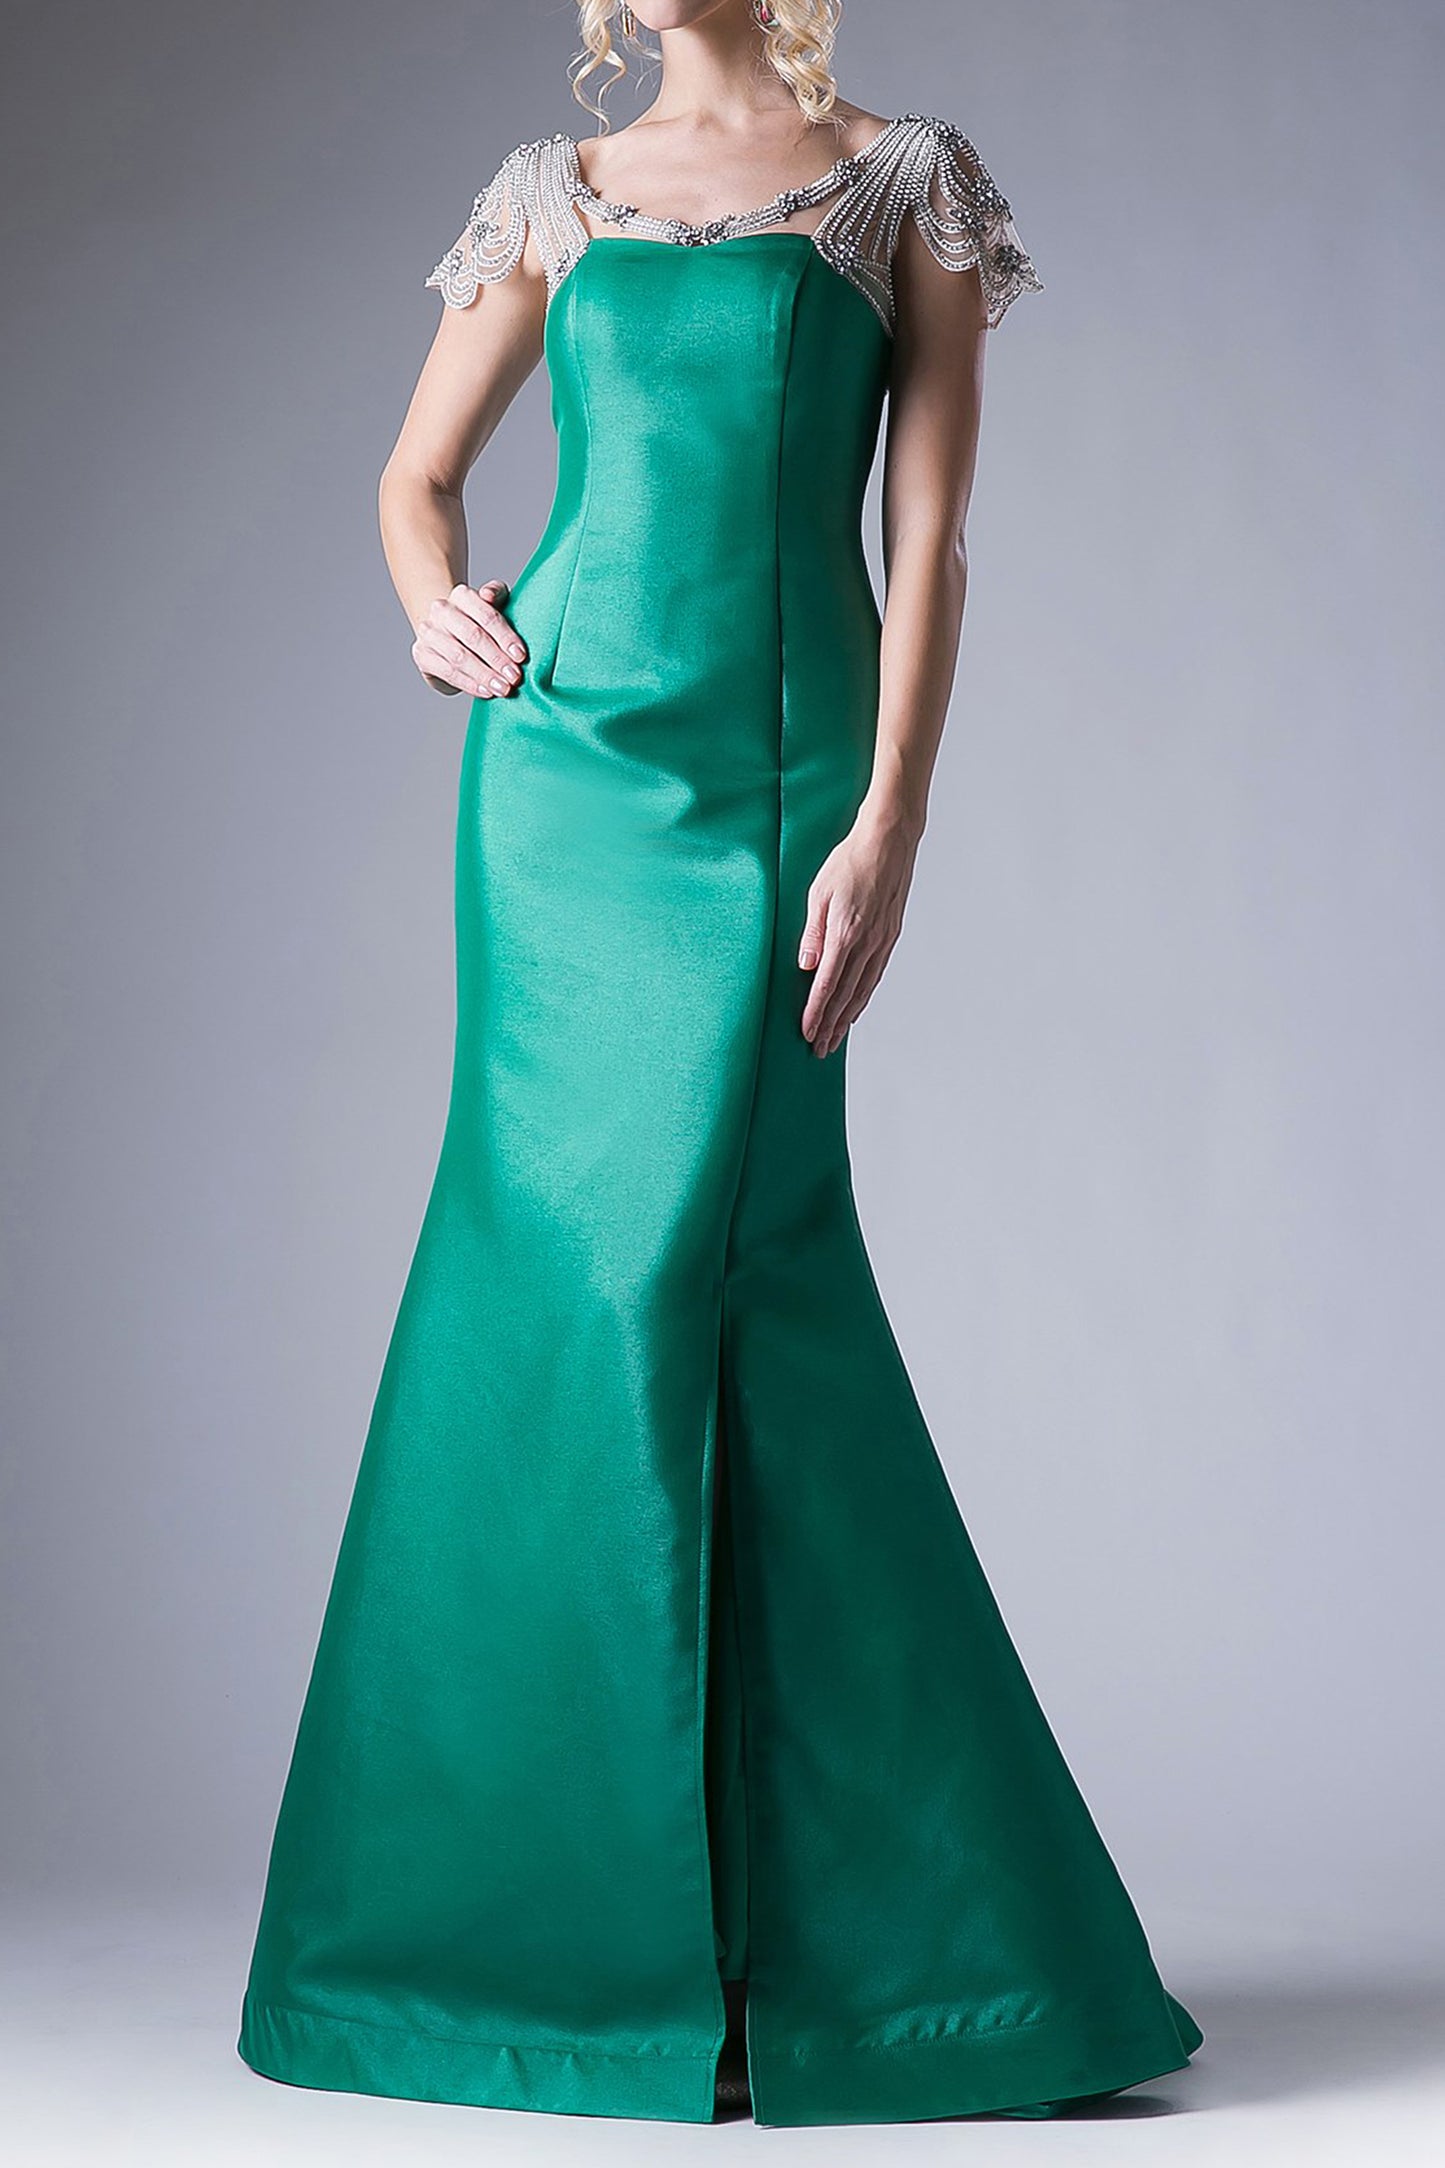 Fitted long dress w/ shoulder beading